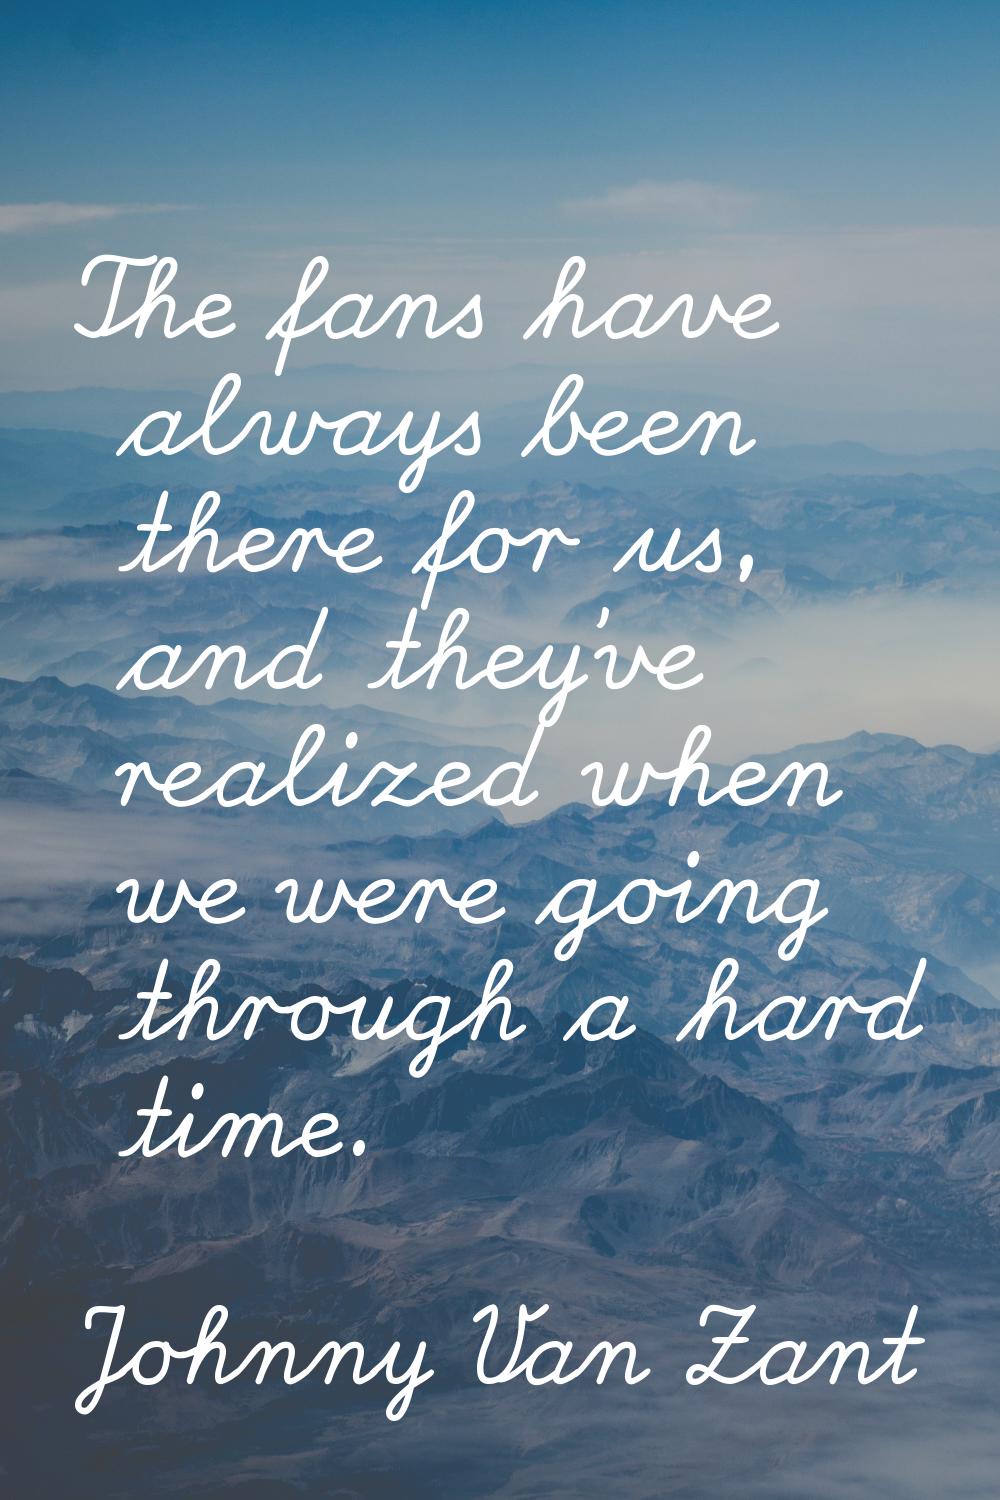 The fans have always been there for us, and they've realized when we were going through a hard time